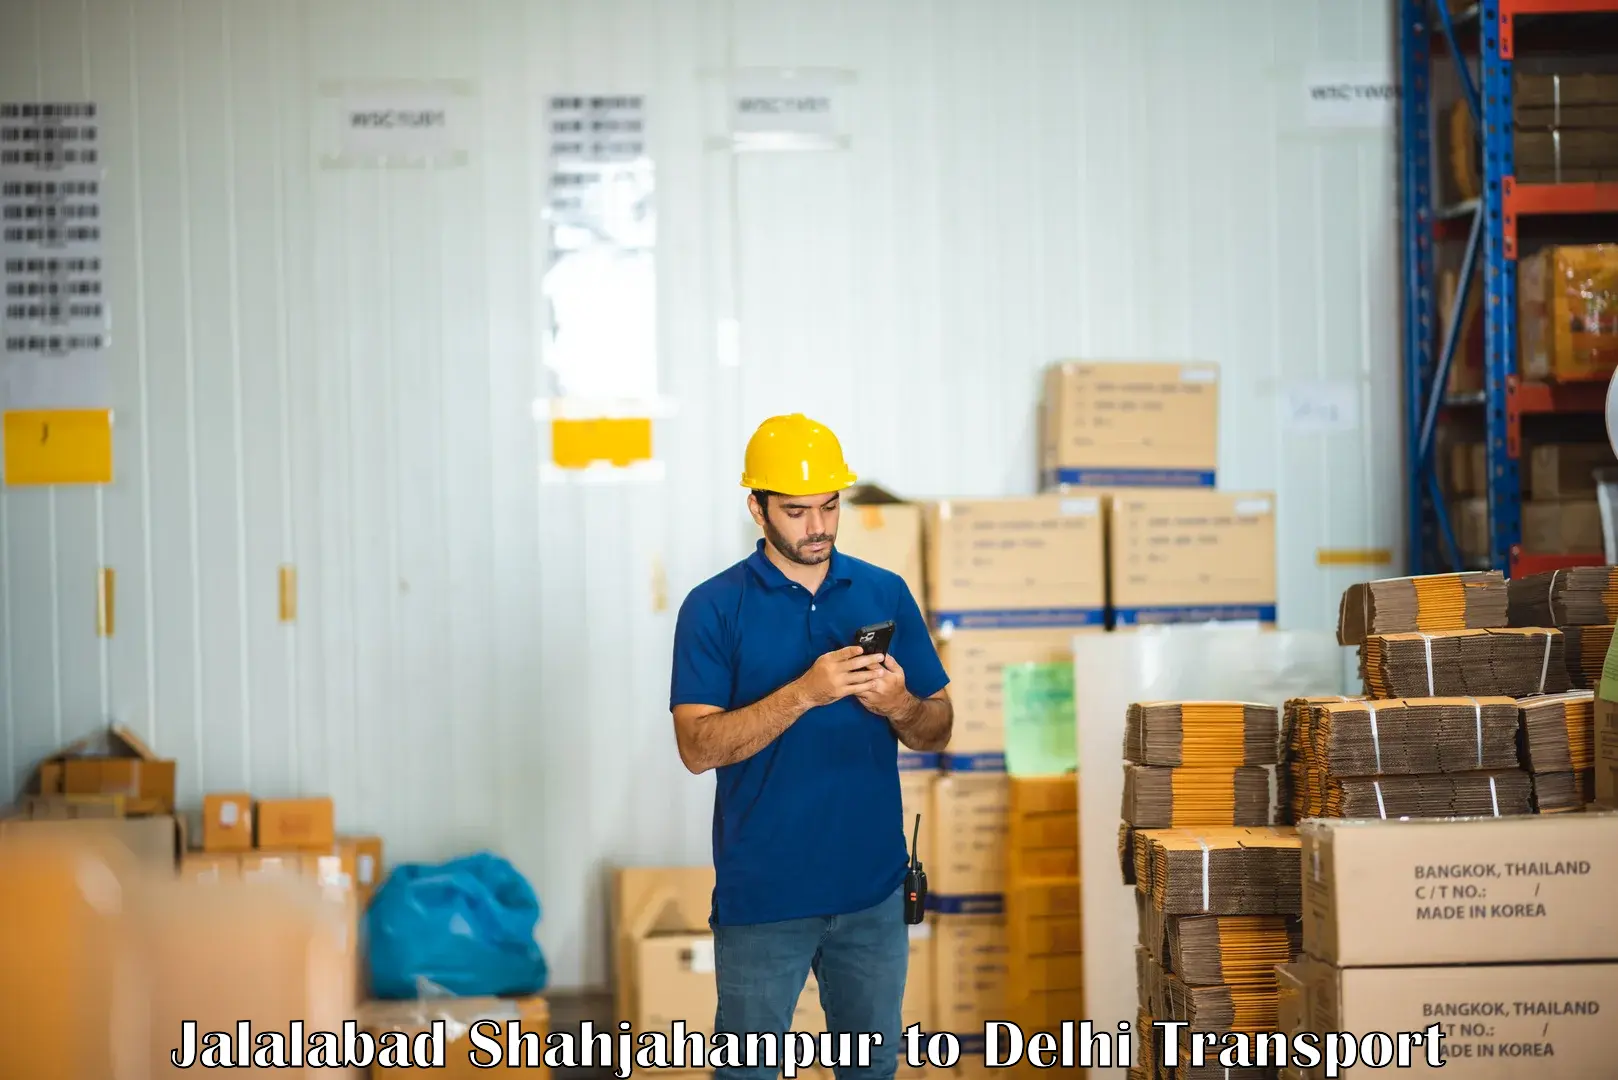 Truck transport companies in India Jalalabad Shahjahanpur to University of Delhi